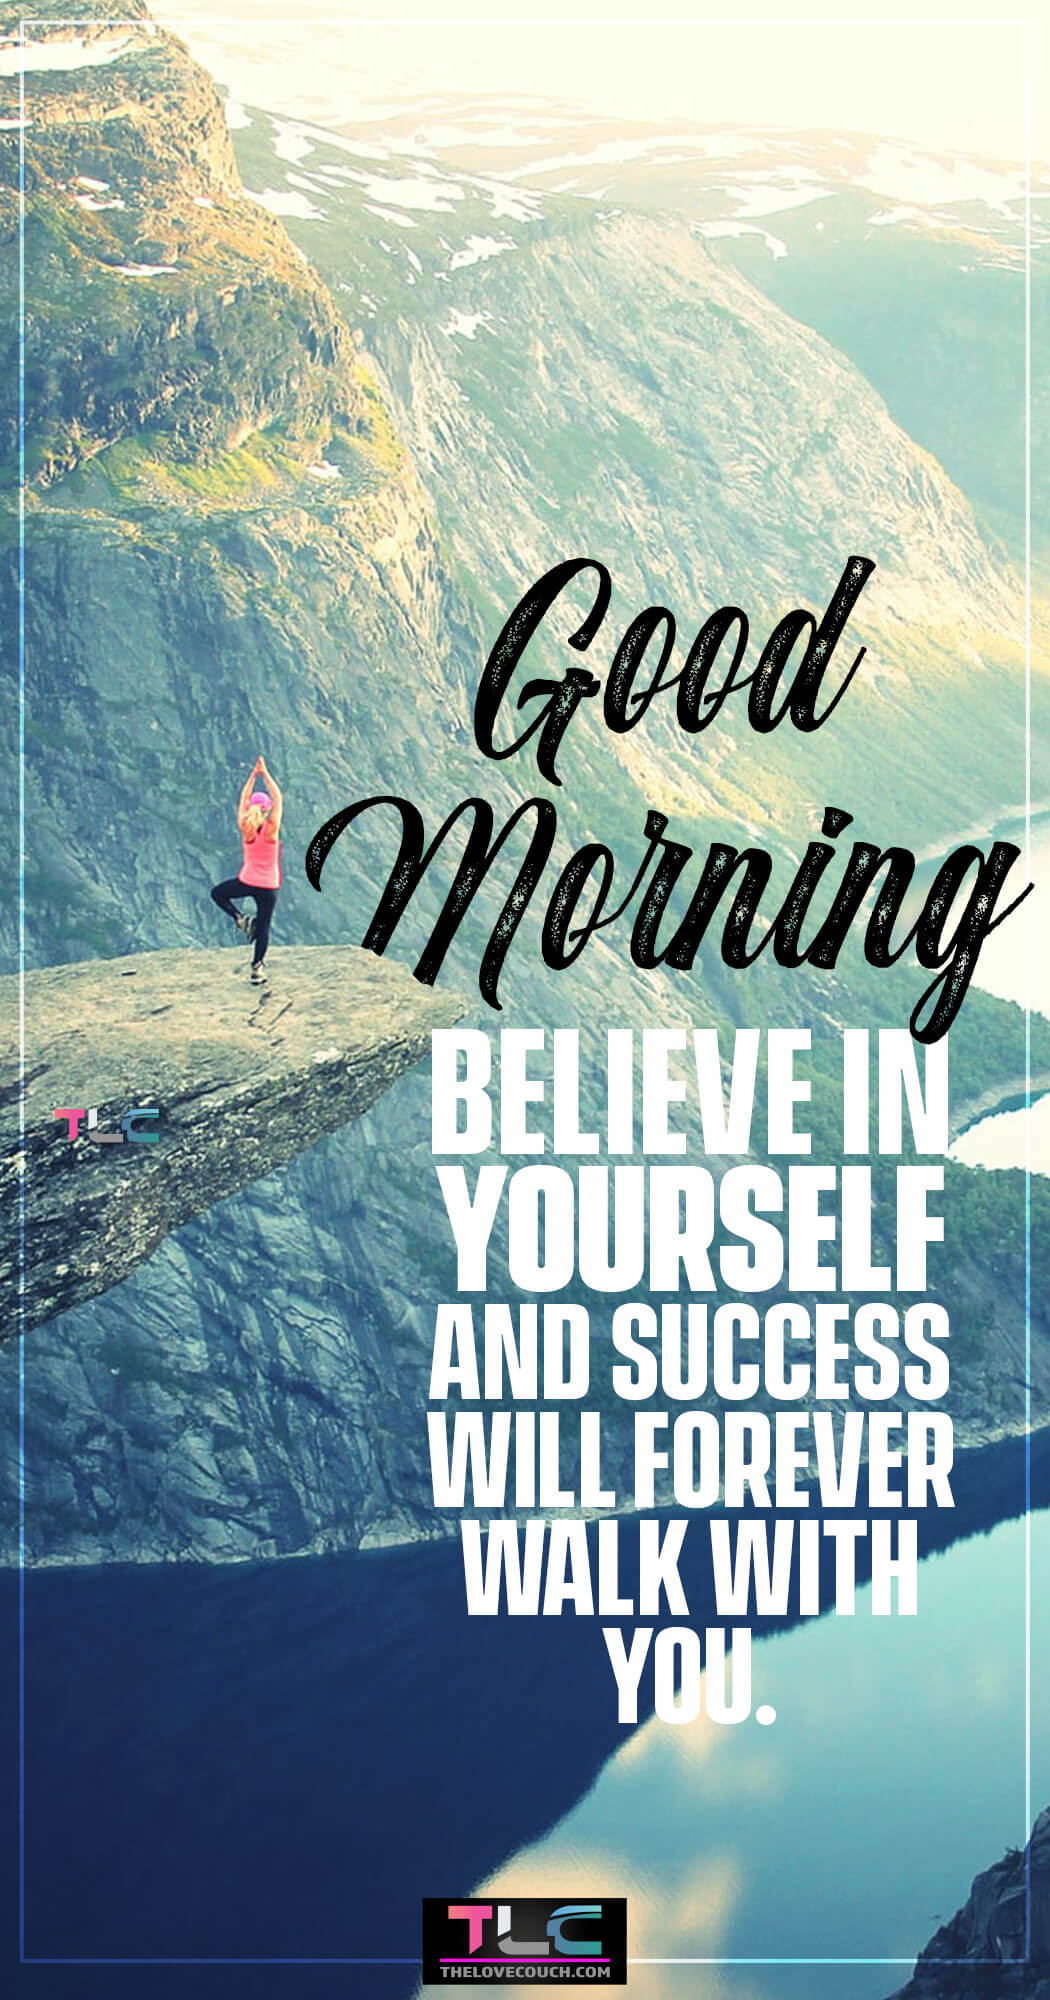 Believe in yourself and success will forever walk with you. - Good Morning Pictures